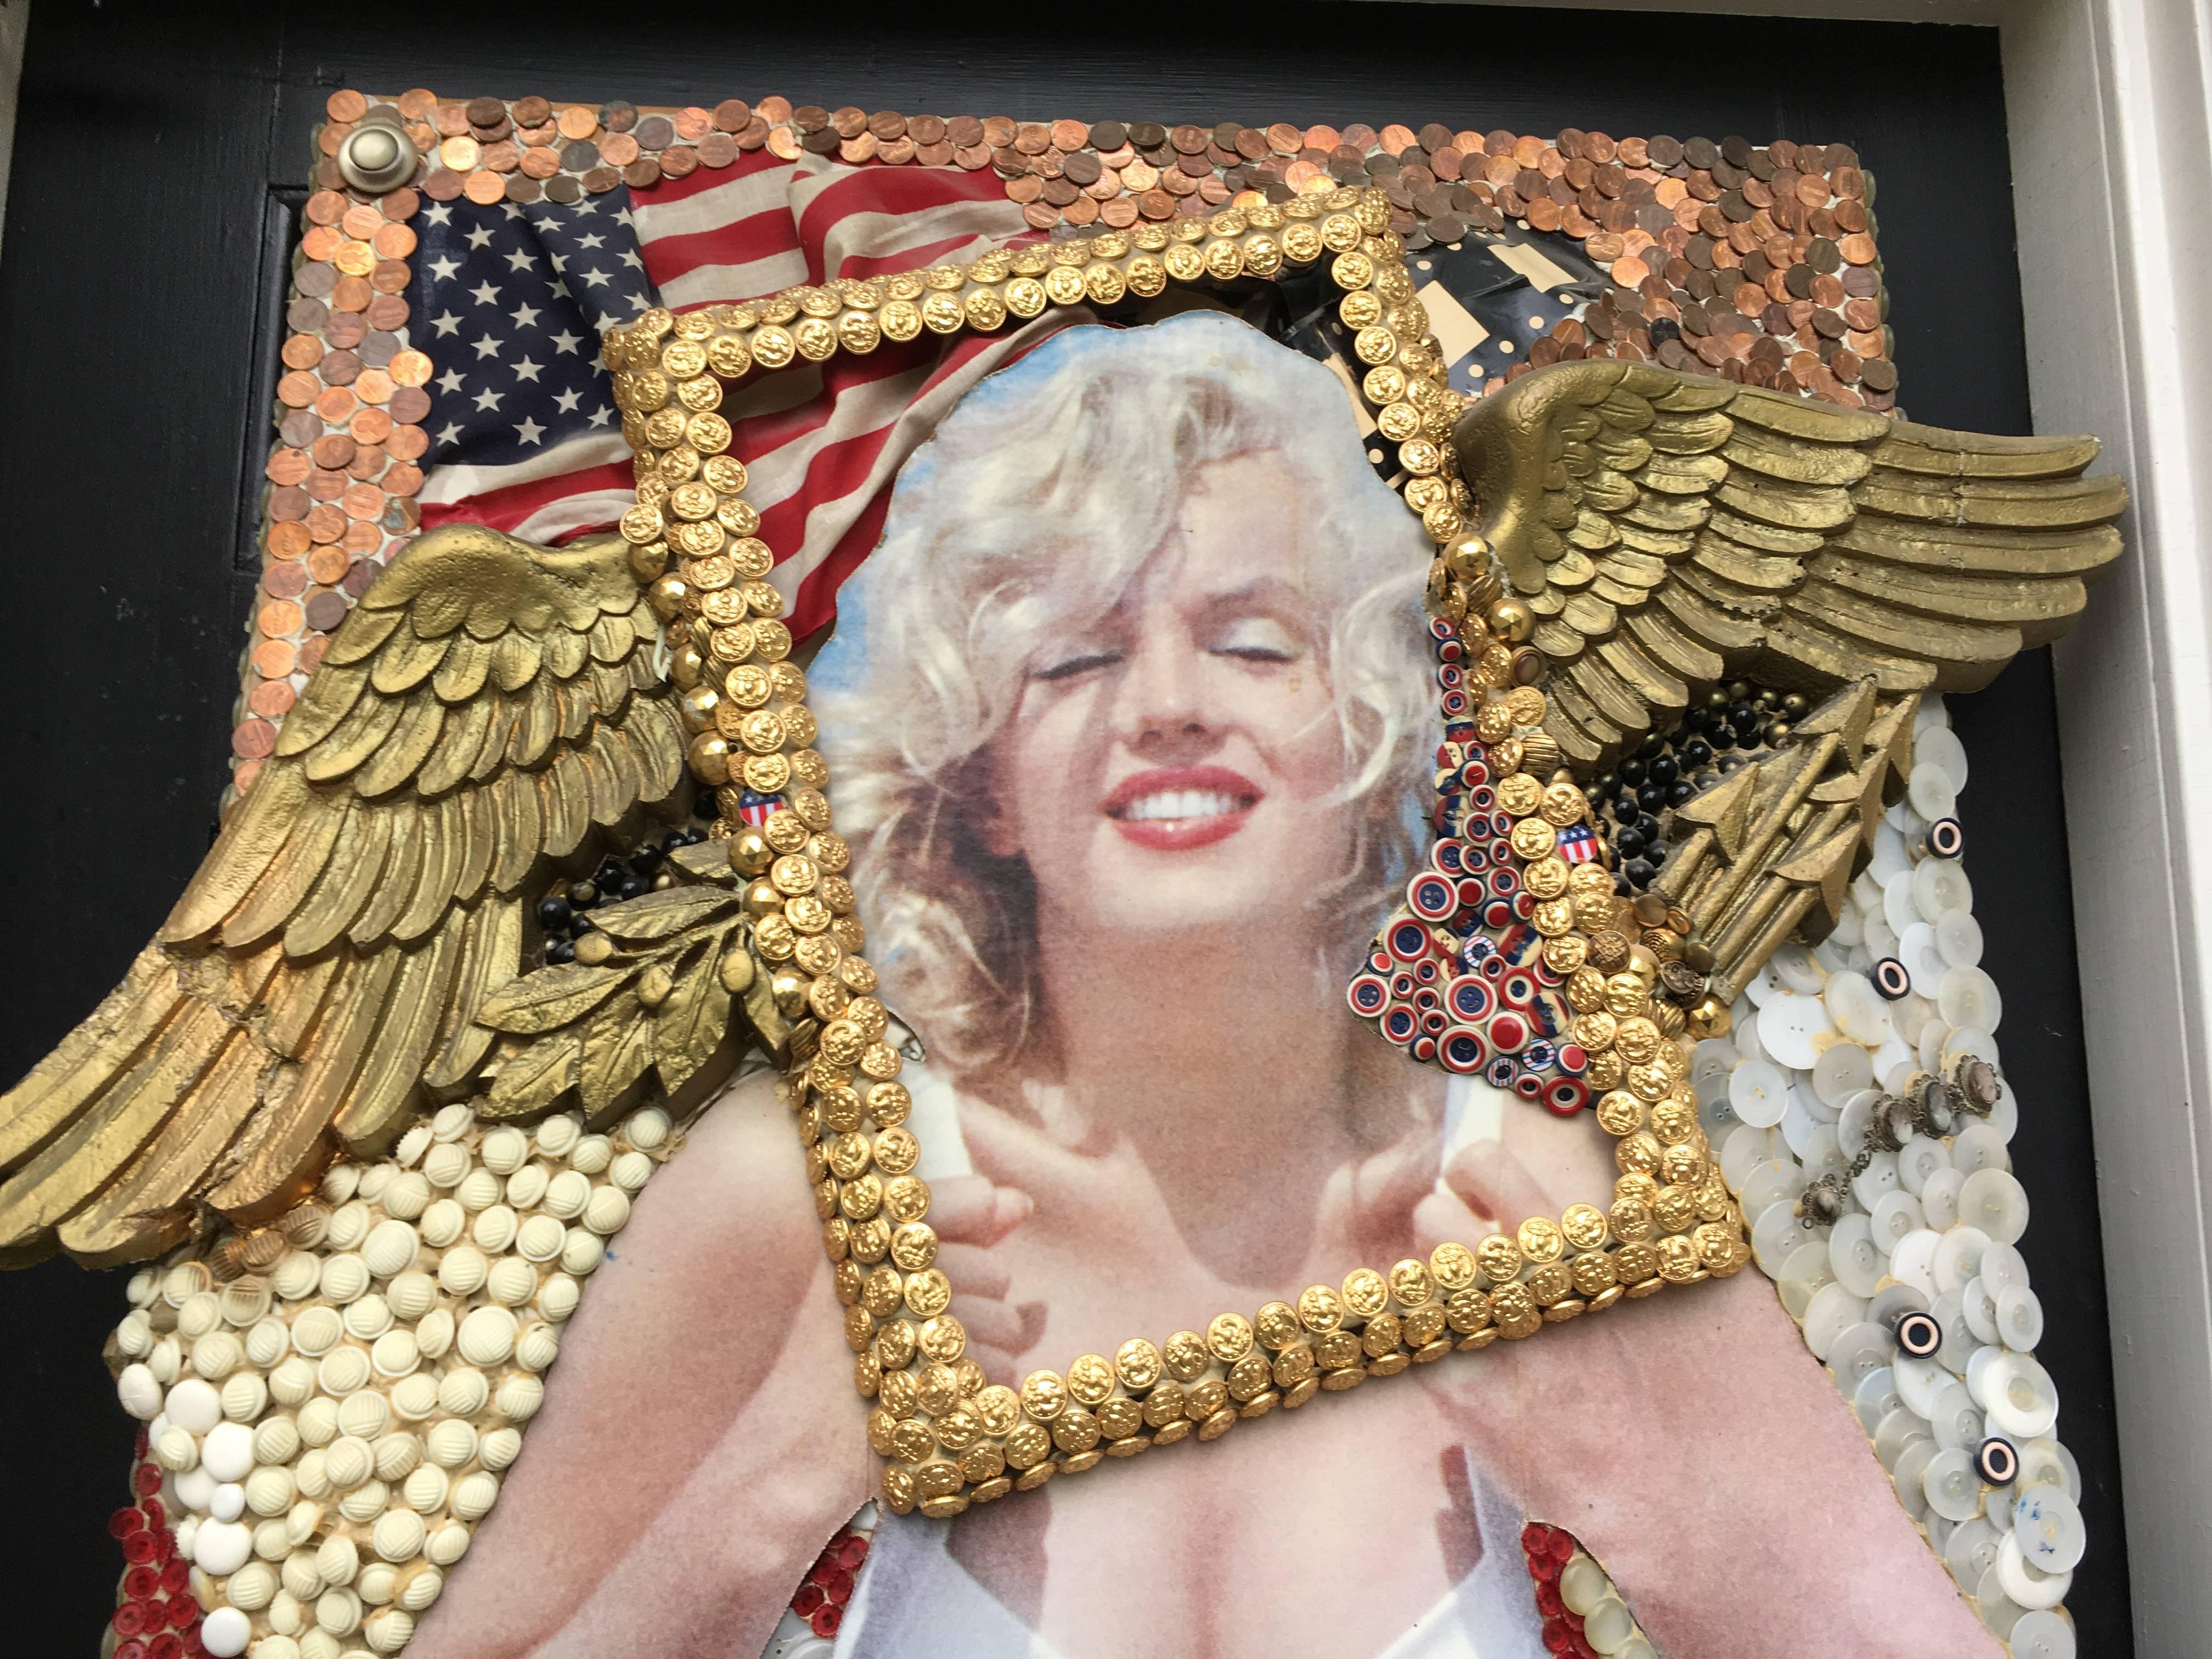 Sensational homage to Marilyn Monroe, this mixed media creation is comprised of found objects such as buttons, pennies and a cardboard print of Marilyn Monroe mounted on a wood door. Entitled Shining Star, artist Philipe Valy (French, b. 1926)